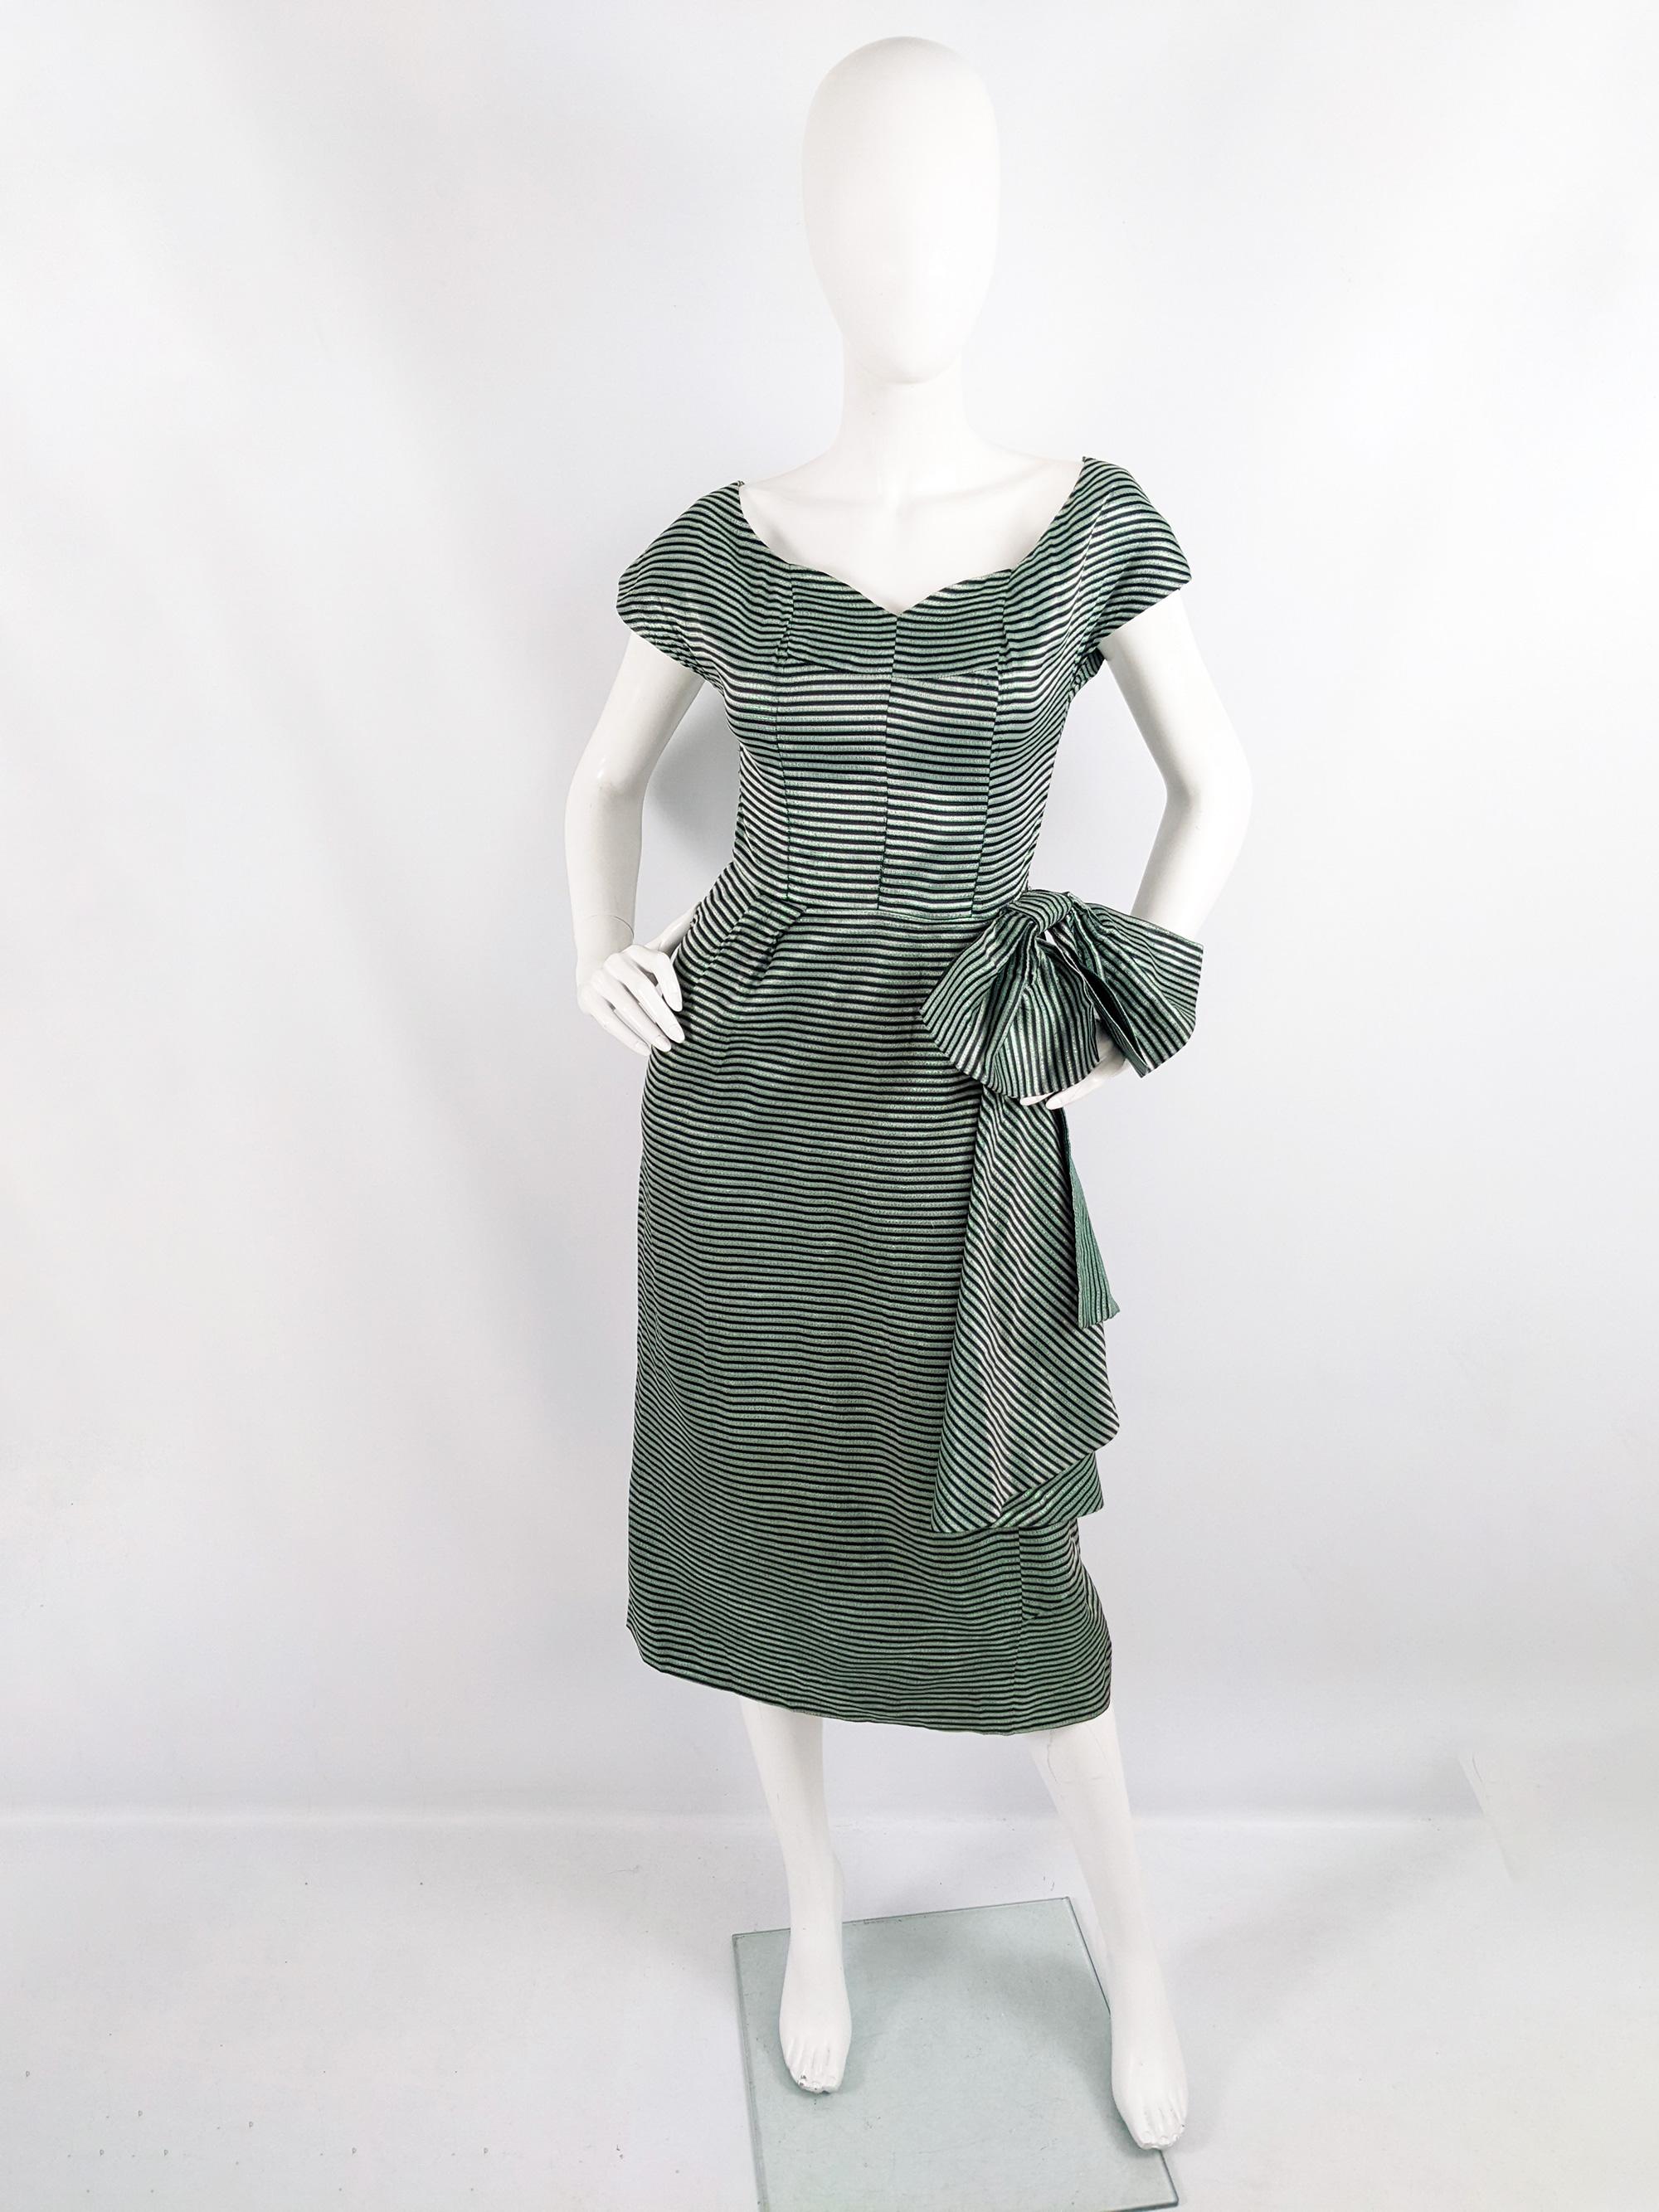 A fabulous vintage womens evening dress from the 50s by Richard Grossmark. In a green and black metallic lamé fabric with a huge bow on the side, cap sleeves and a flattering, sweetheart neckline.

Size: Marked vintage 36 but measures roughly like a